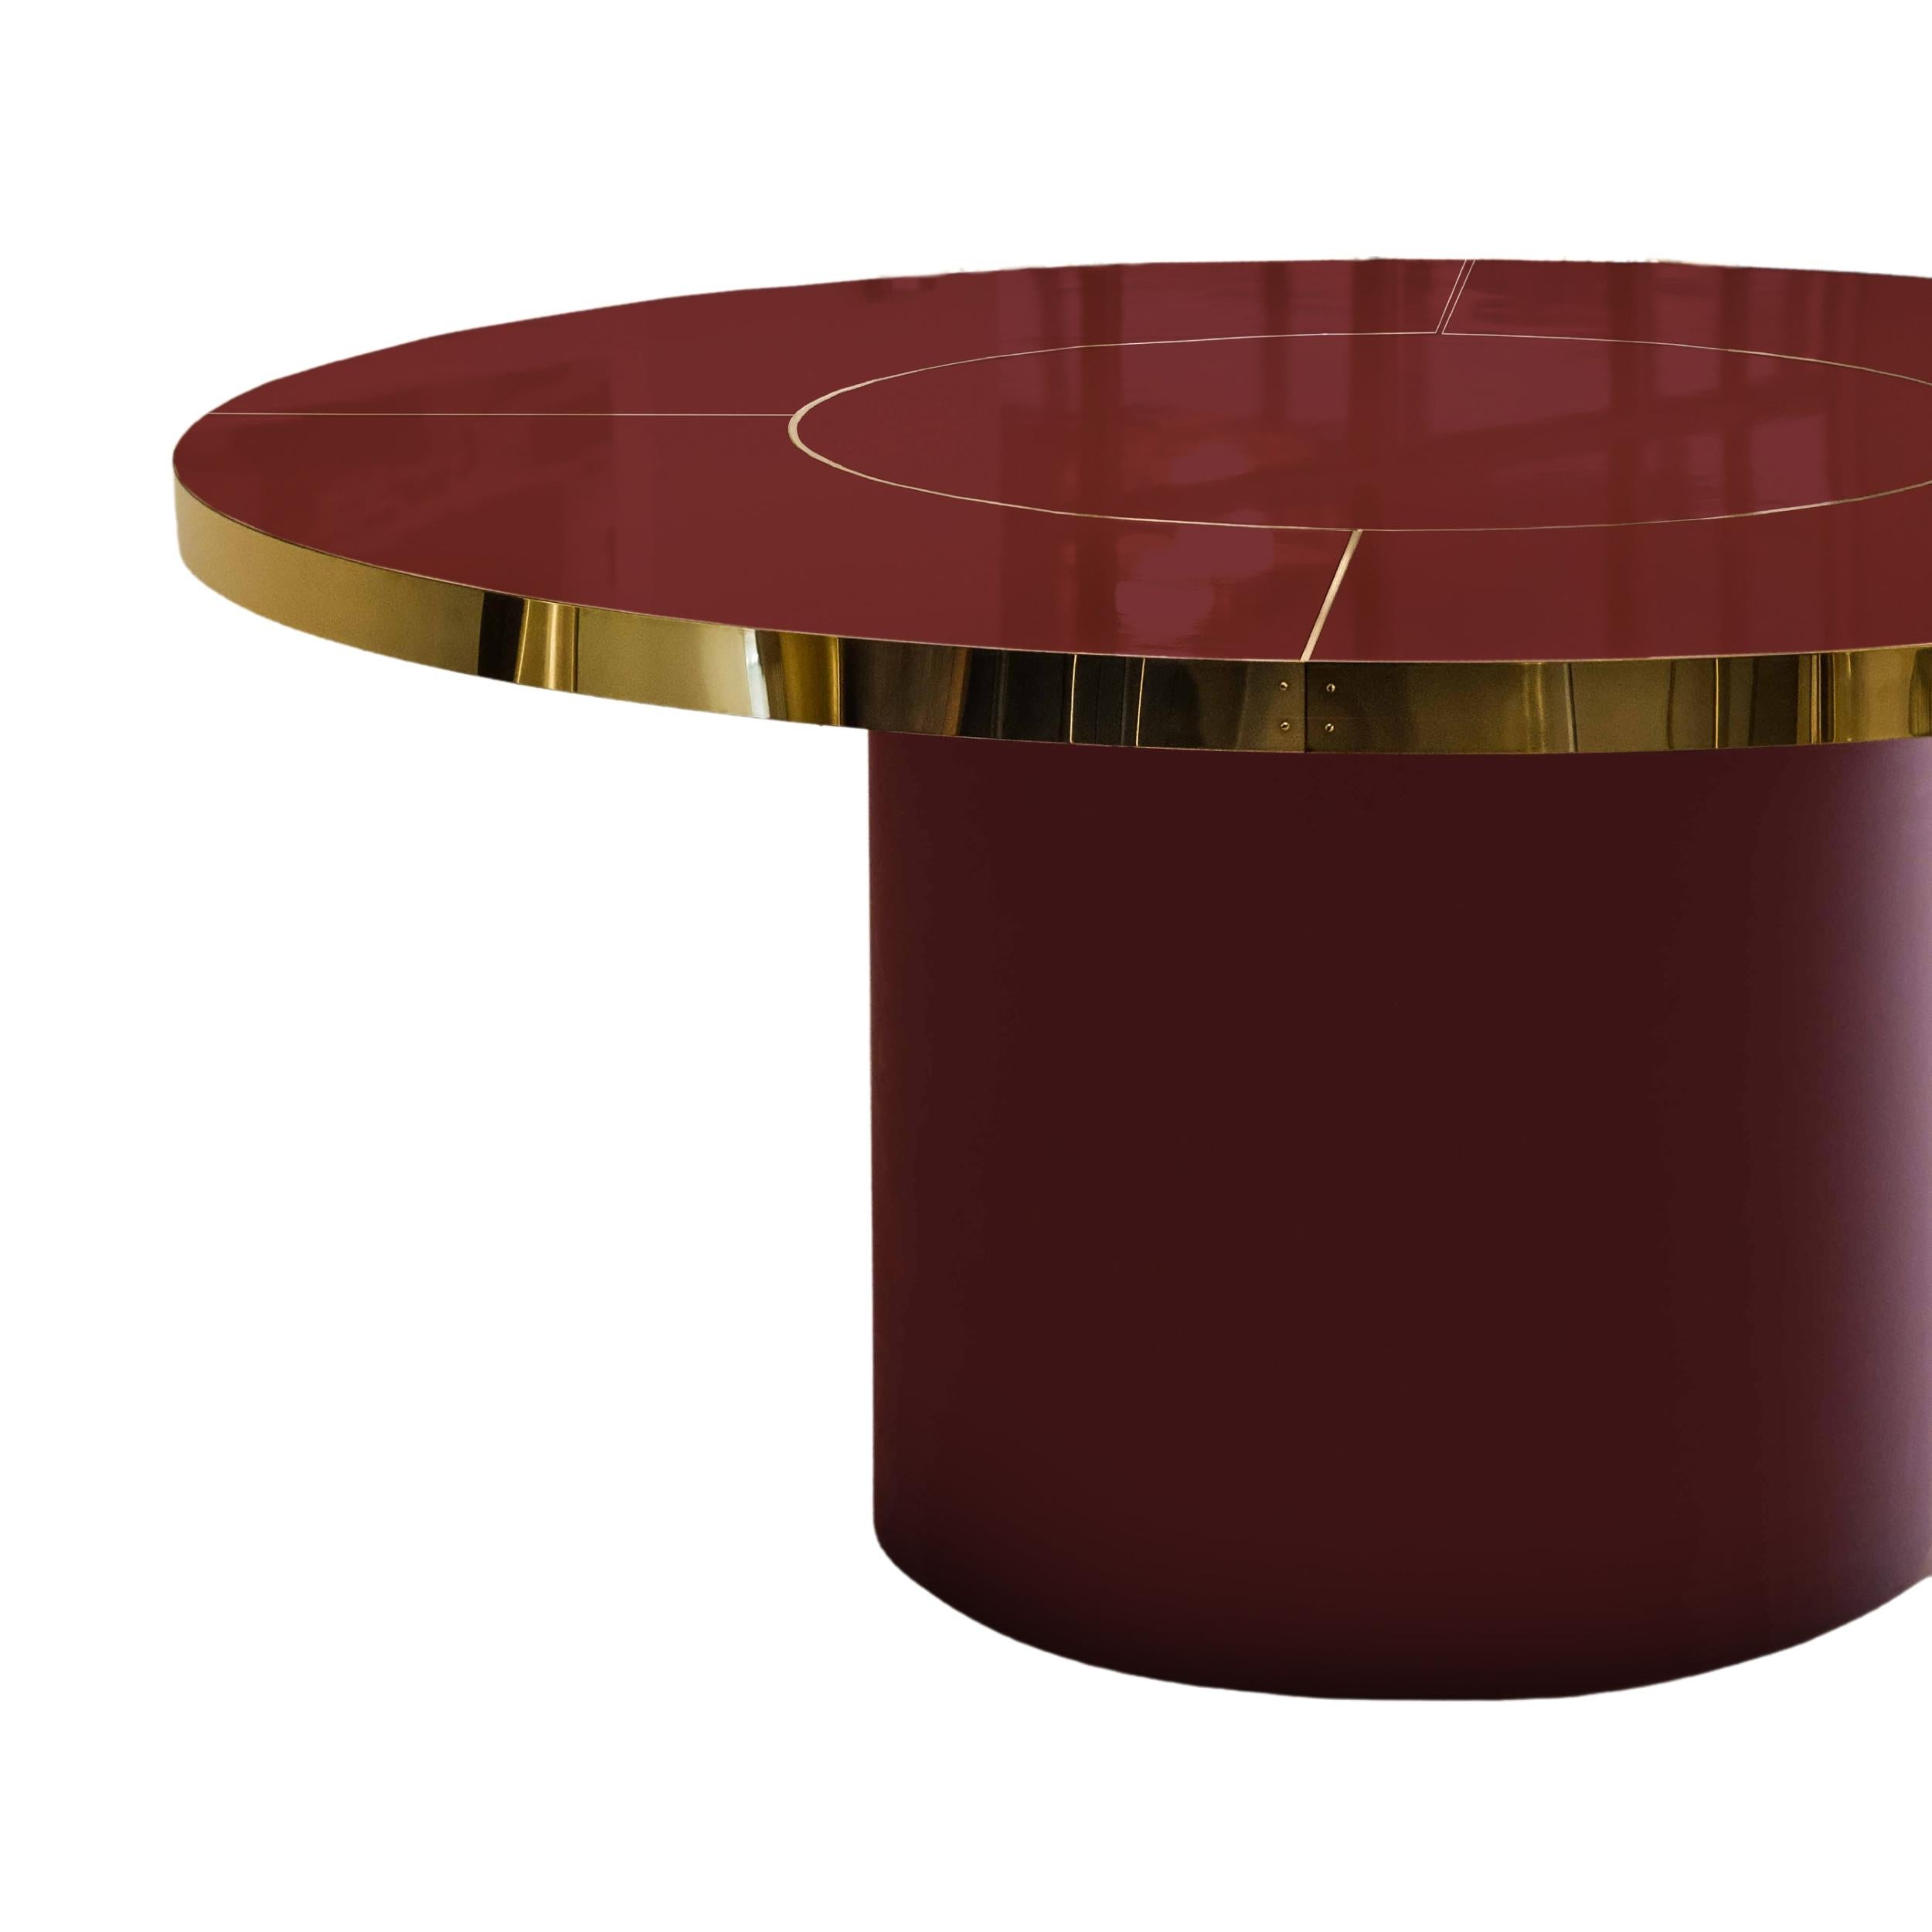 Retro Design Round Dining Table Palm Springs Style High Gloss Laminated & Brass Details Extra Large Size

Discover our incredible collection of retro-style design tables inspired by the iconic decoration of the 1950s, 60s, and 70s of Palm Springs in